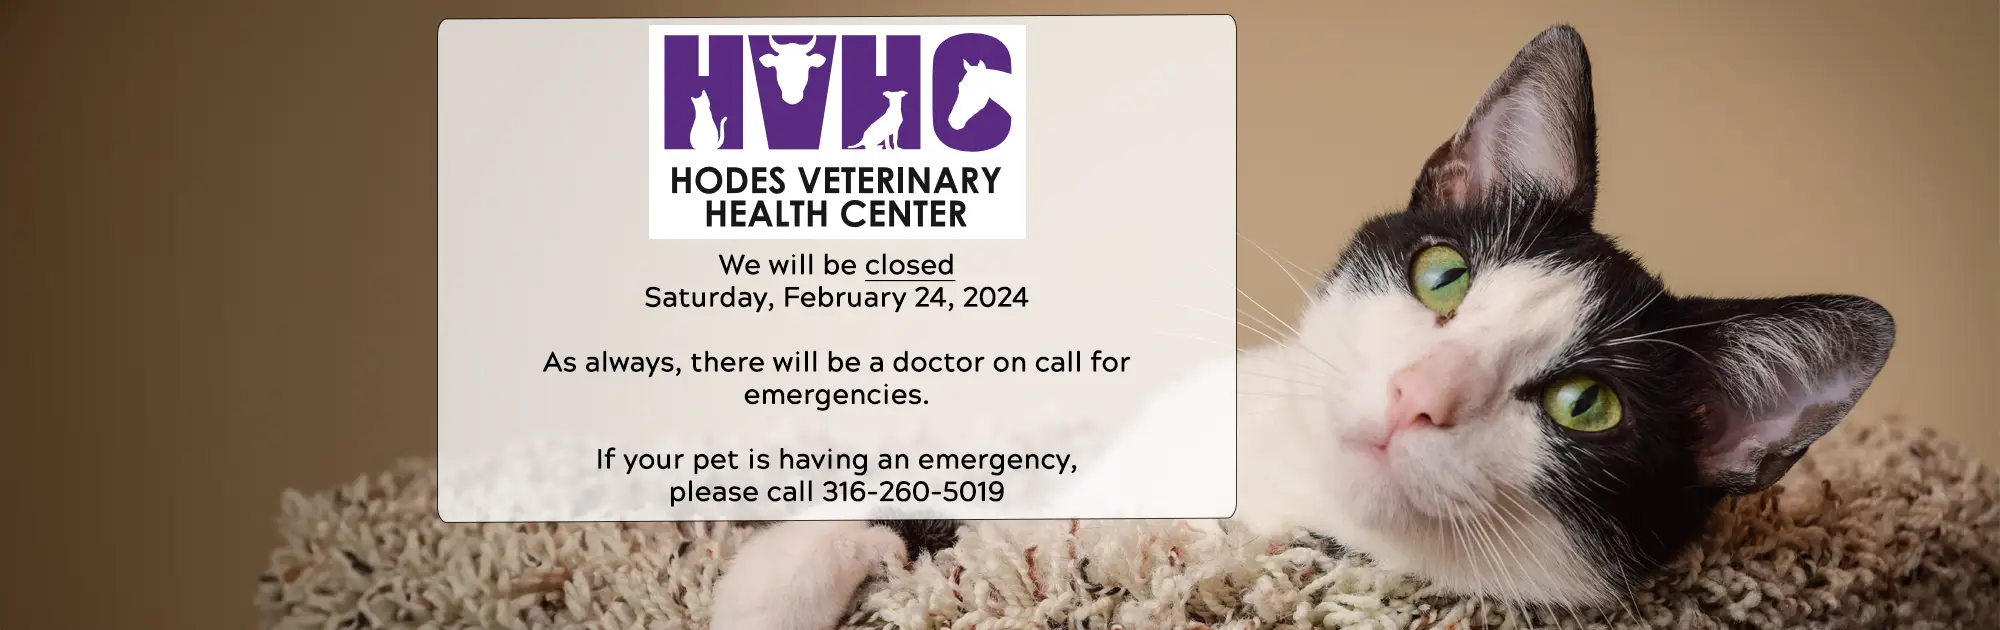 We will be closed  Saturday, February 24, 2024  As always, there will be a doctor on call for emergencies.   If your pet is having an emergency,  please call 316-260-5019 